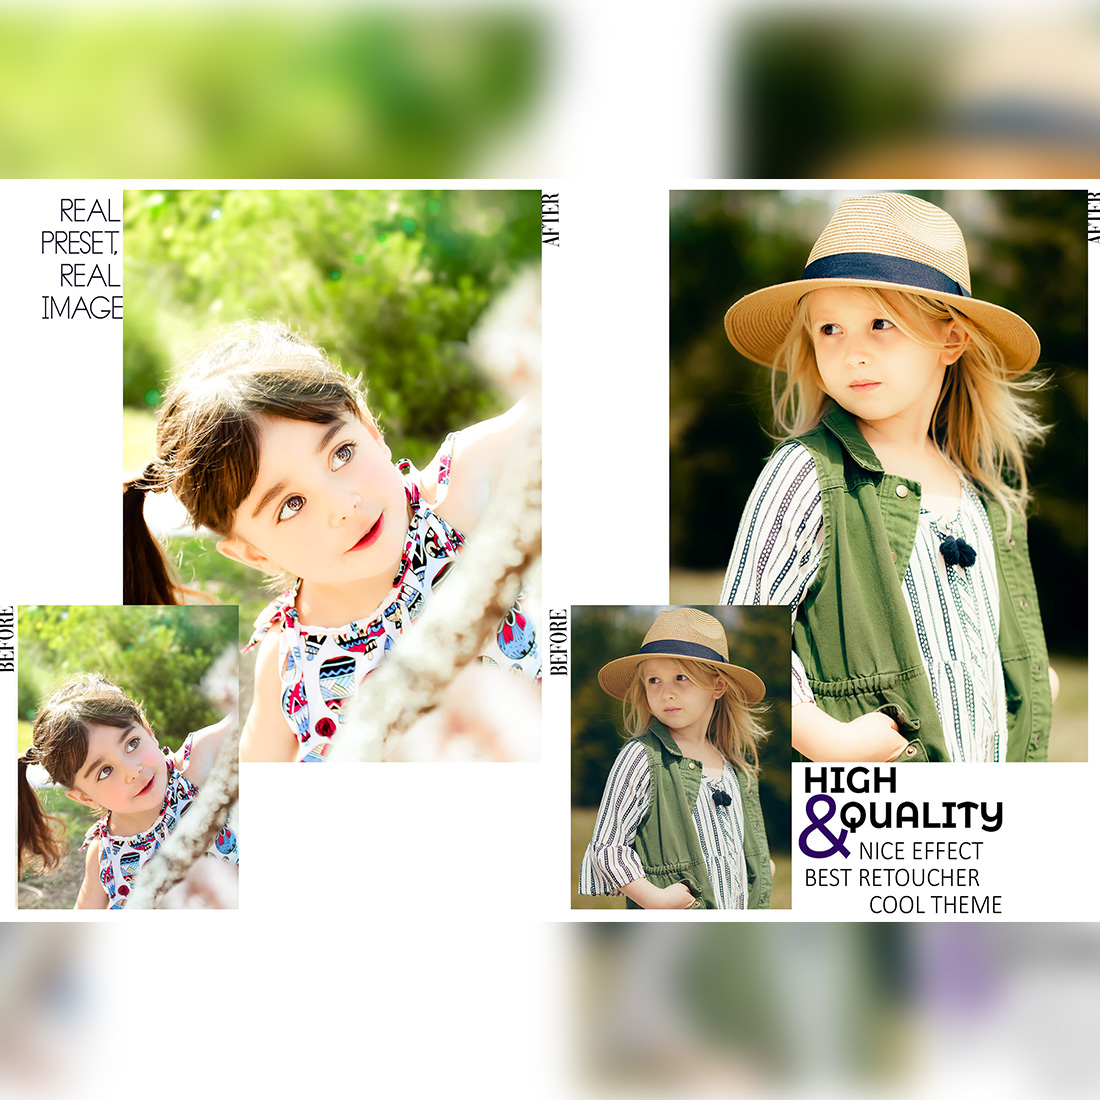 12 Photoshop Actions, Cute Kids Ps Action, Bright ACR Preset, Children Ps Filter, Portrait And Lifestyle Theme For Instagram, Blogger preview image.